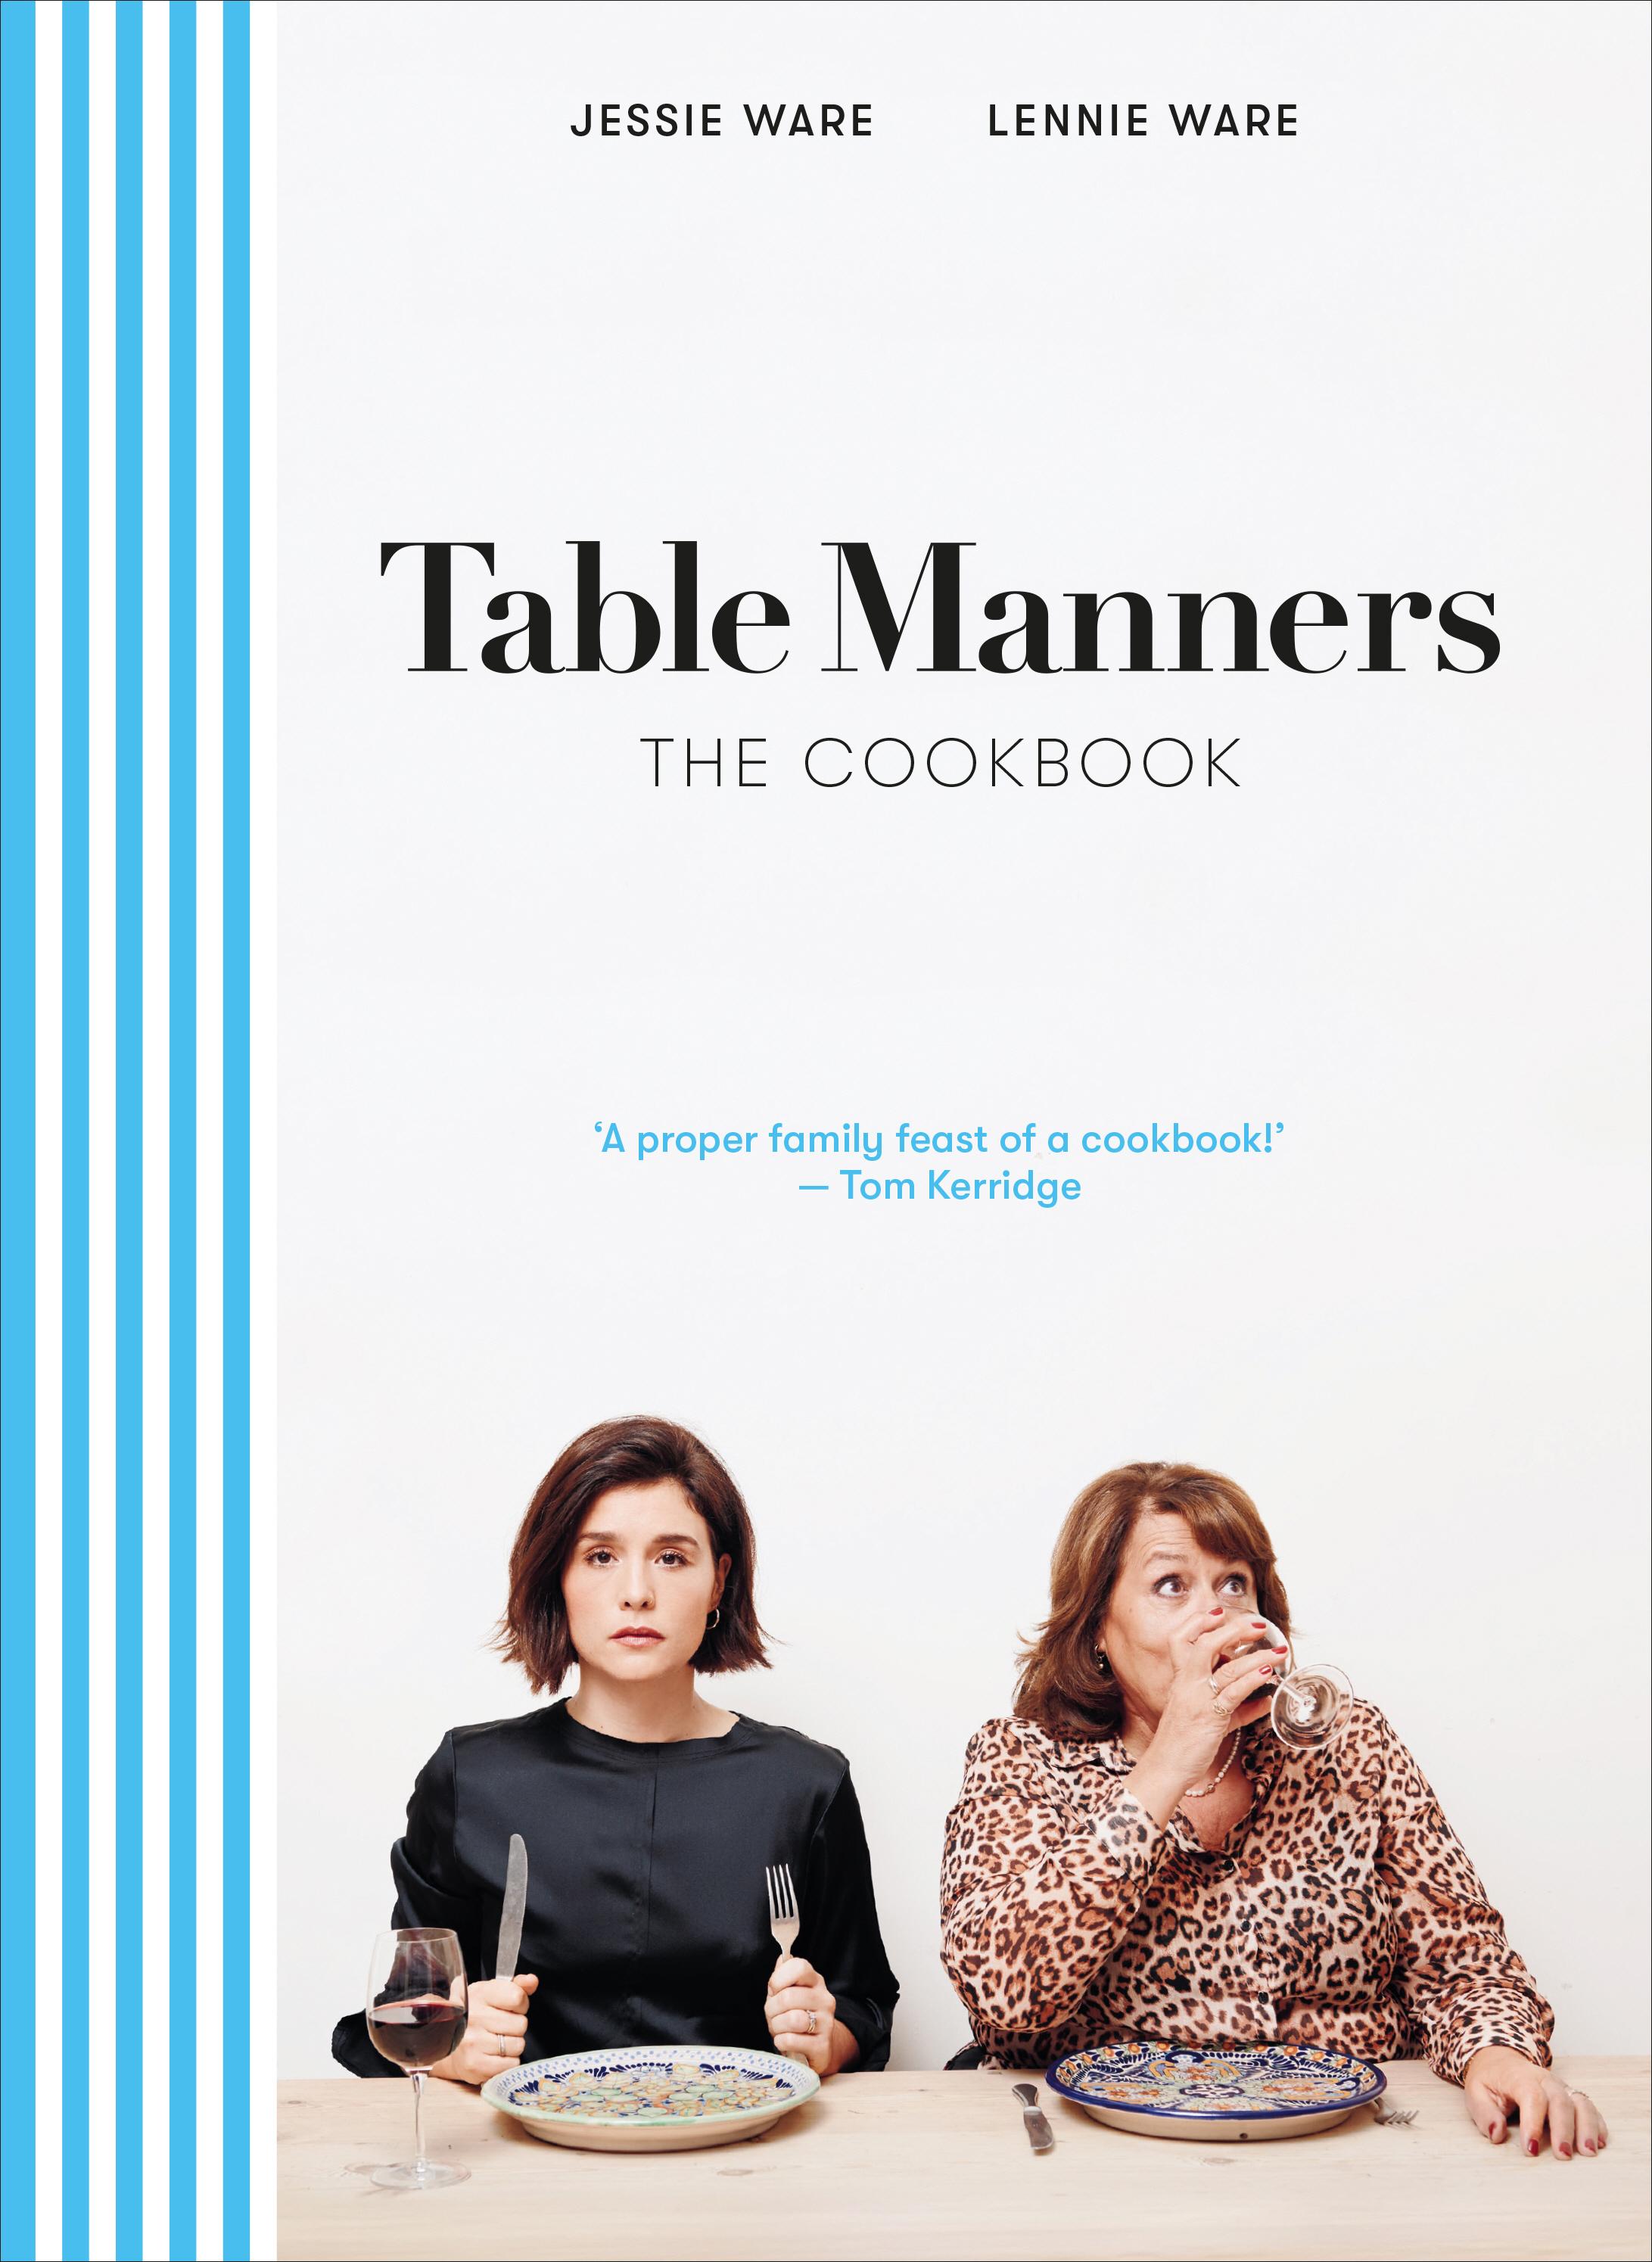 Table Manners: The Cookbook - Jessie Ware